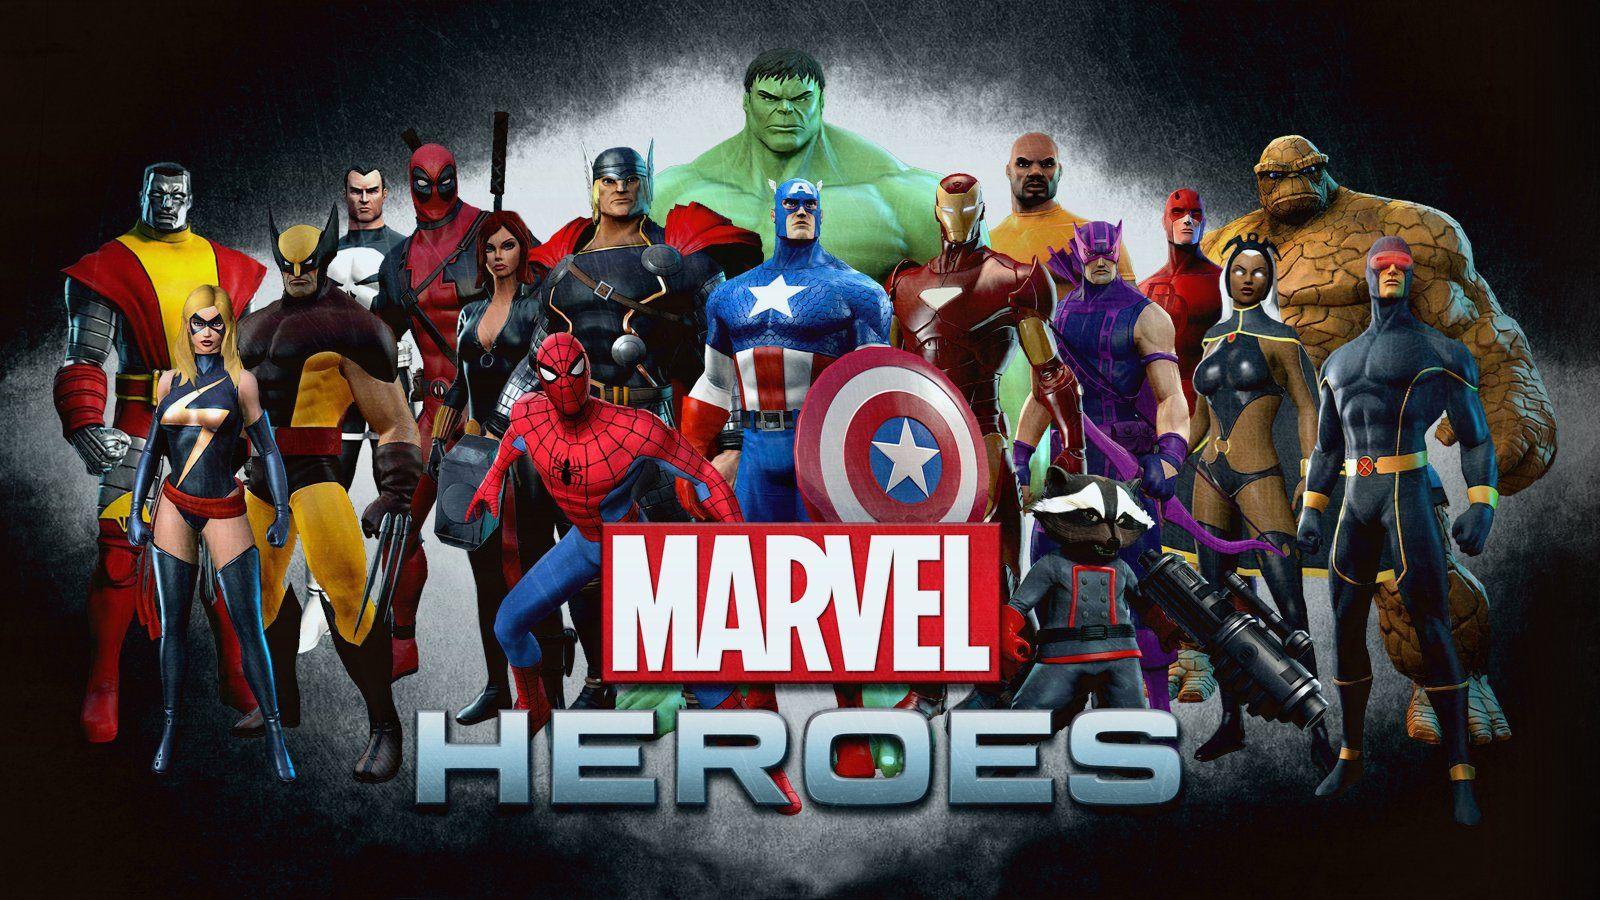 Marvel Heroes HD Wallpaper and Background Image